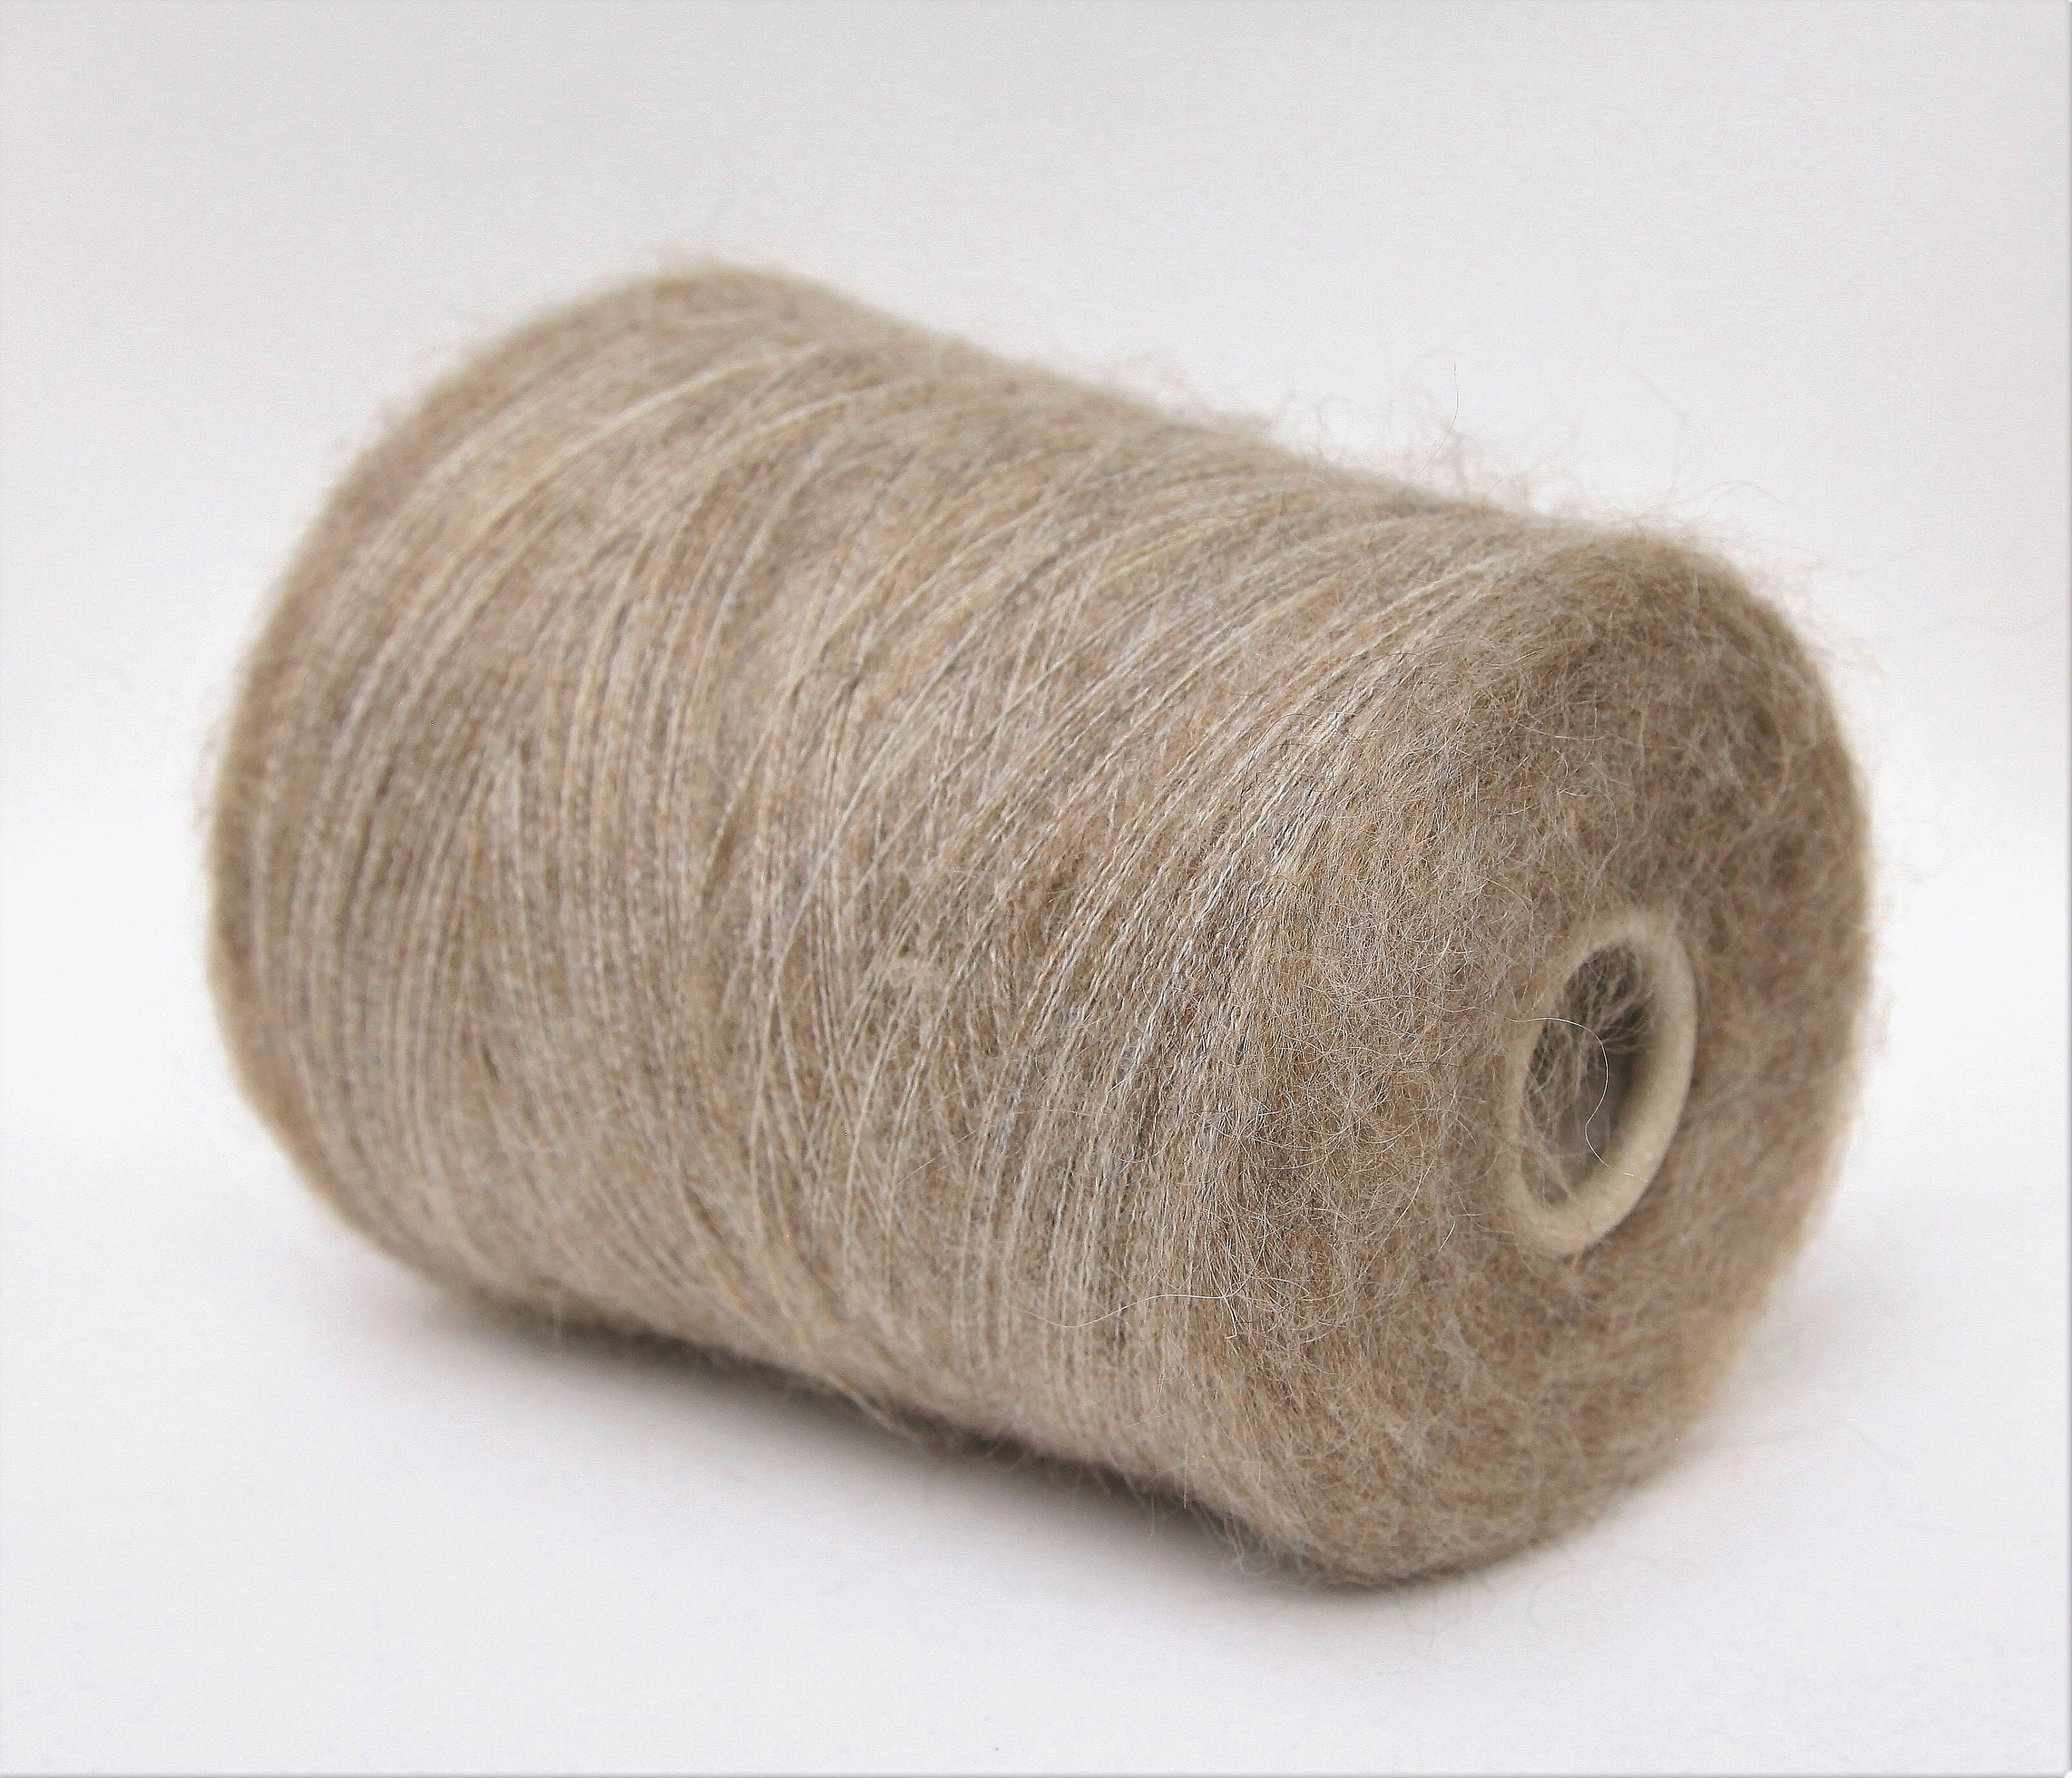 Mohair yarn on cone, lace weight yarn for knitting, weaving and crochet,  per 50g